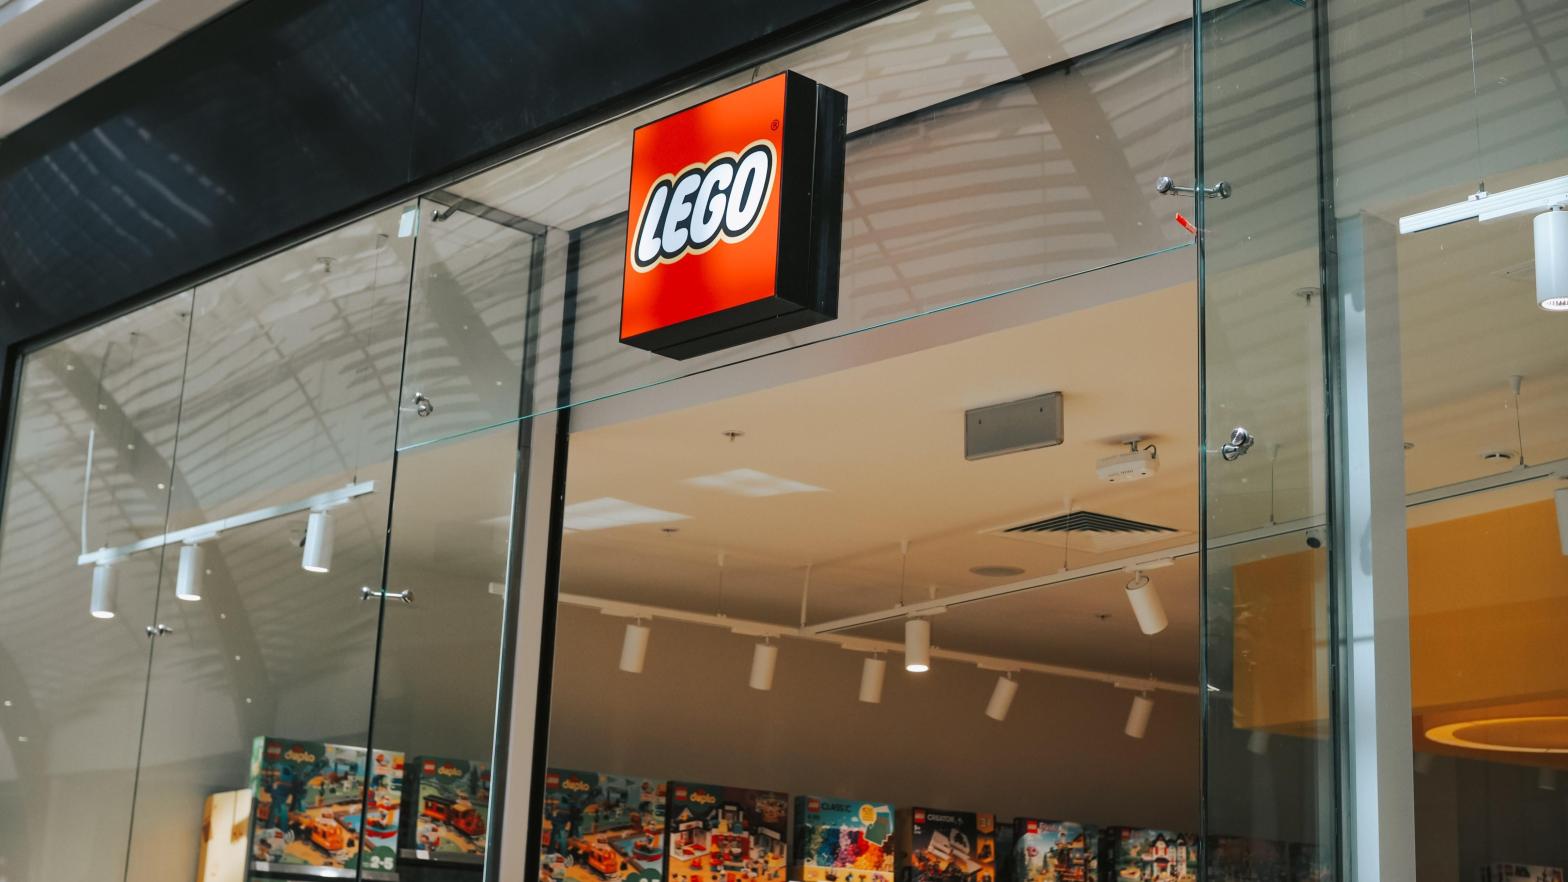 Lego Store located in a mall in Moscow. (Photo: Anastasia MiPhoto, Shutterstock)